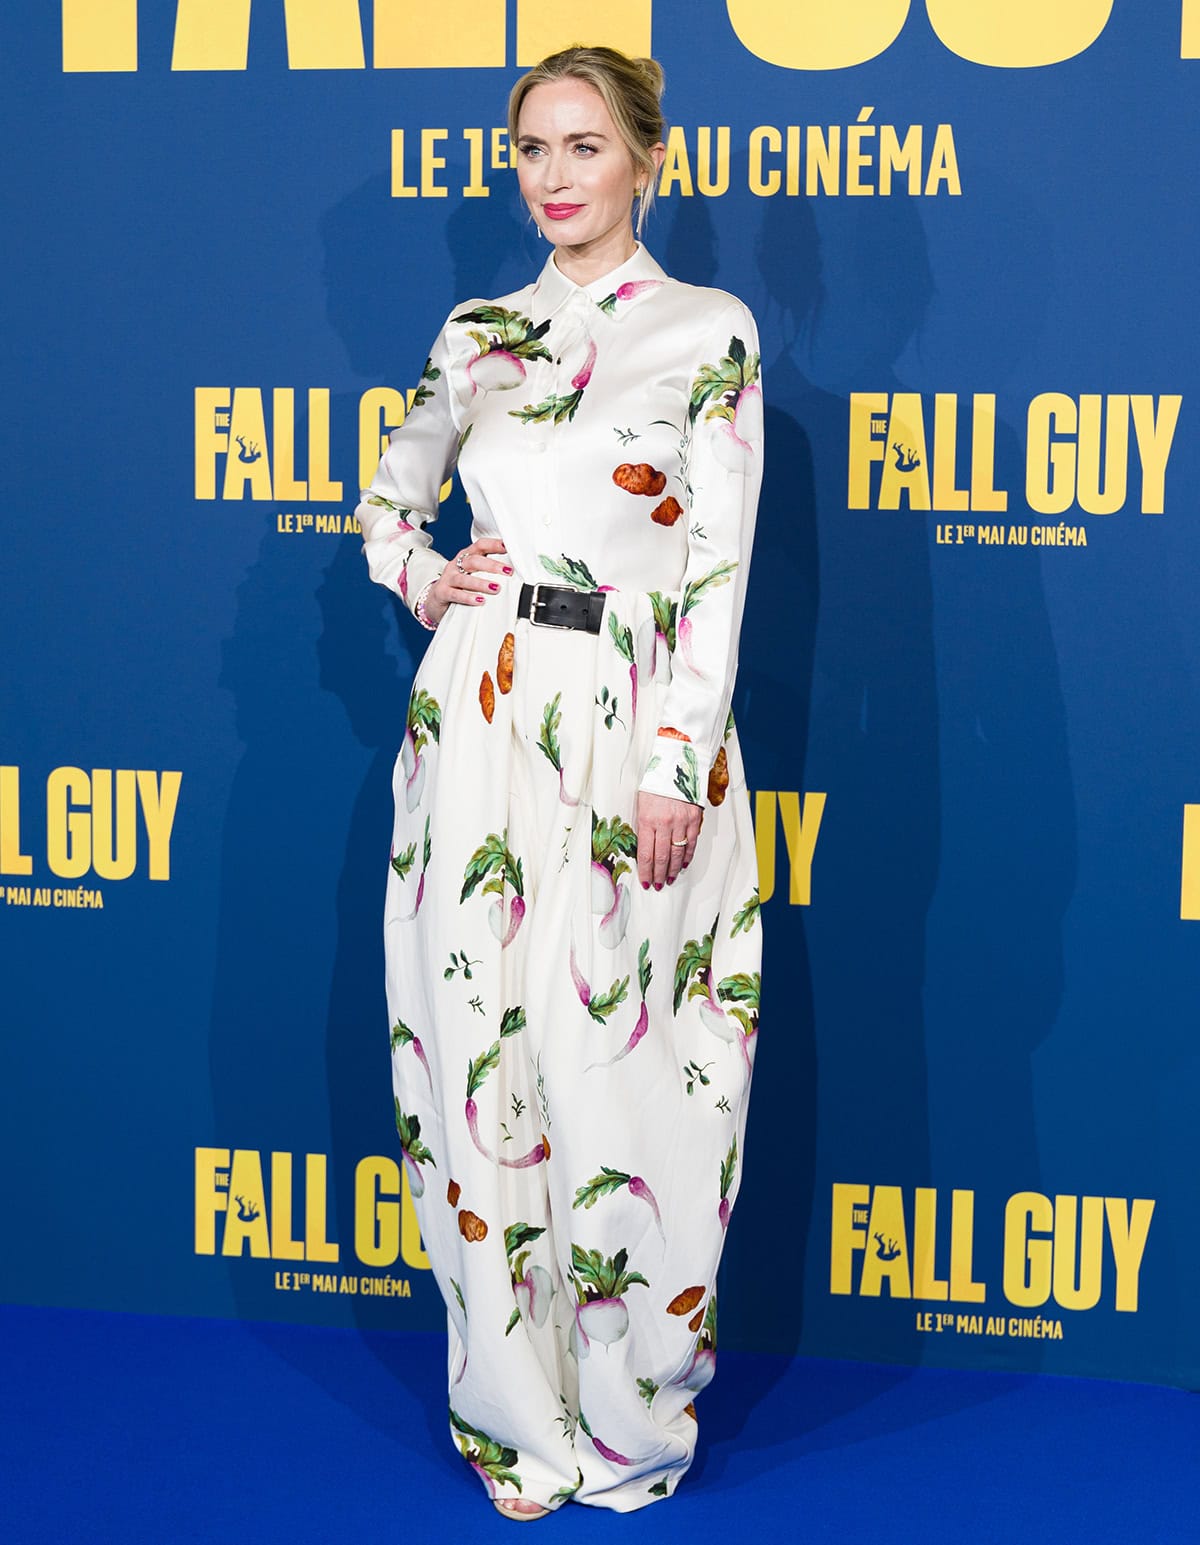 Emily Blunt's white vegetable-printed outfit features a collared, long-sleeved blouse and belted high-waist balloon trousers